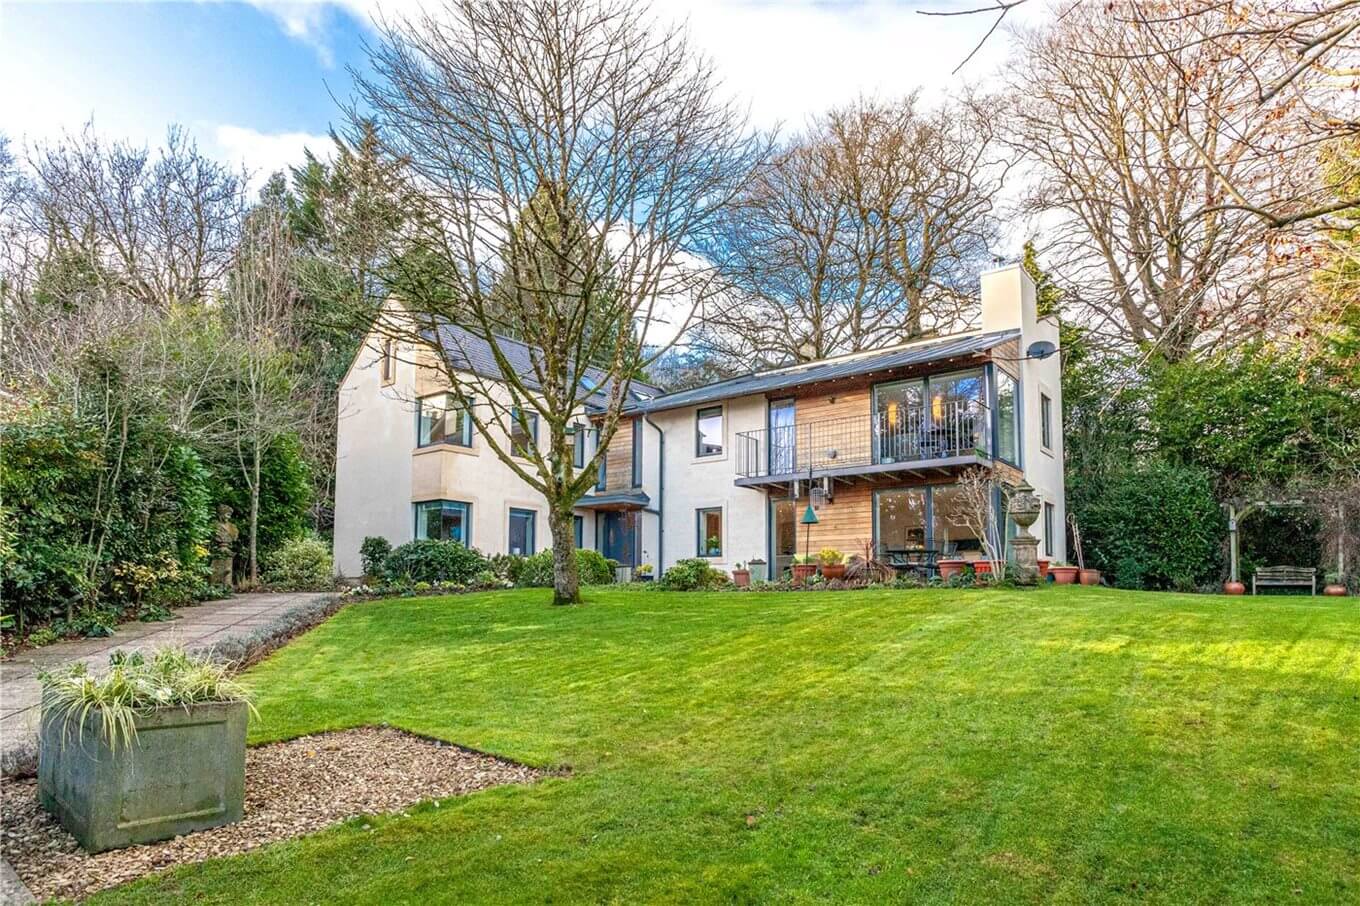 5 Bedroom Detached House for Sale in Bath